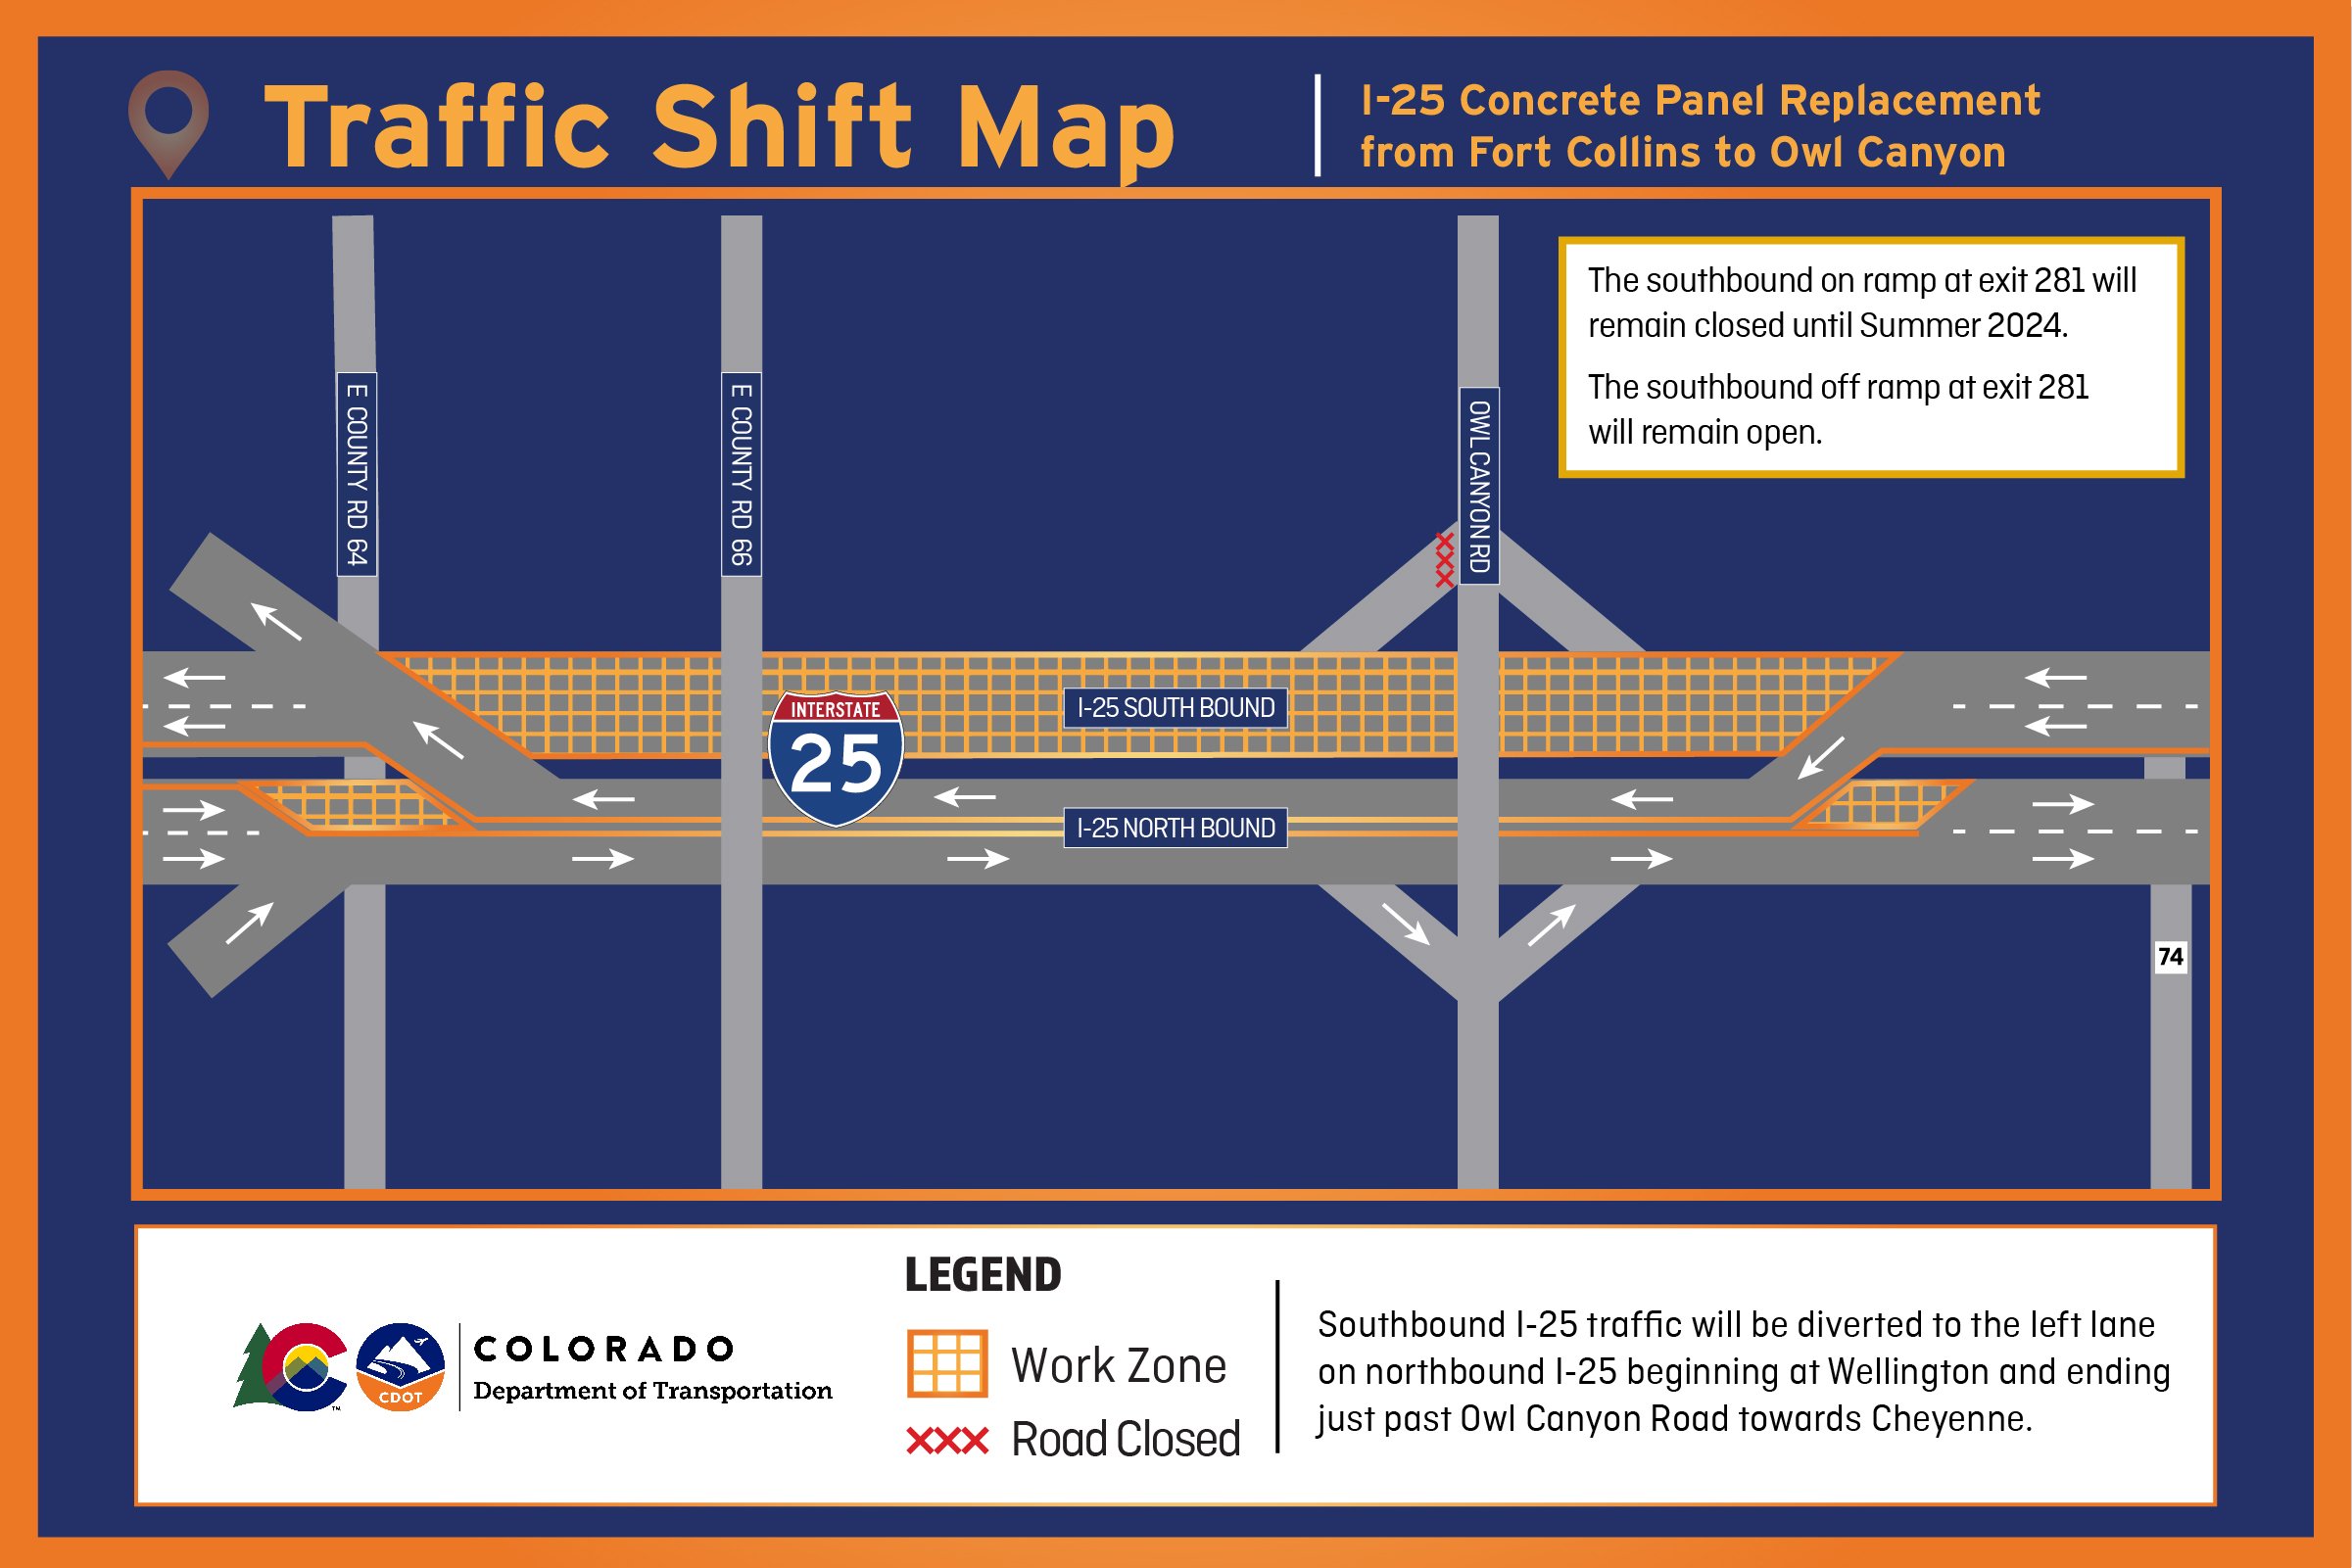 Map showing I-25 Concrete Panel Replacement from Fort Collins to Owl Canyon